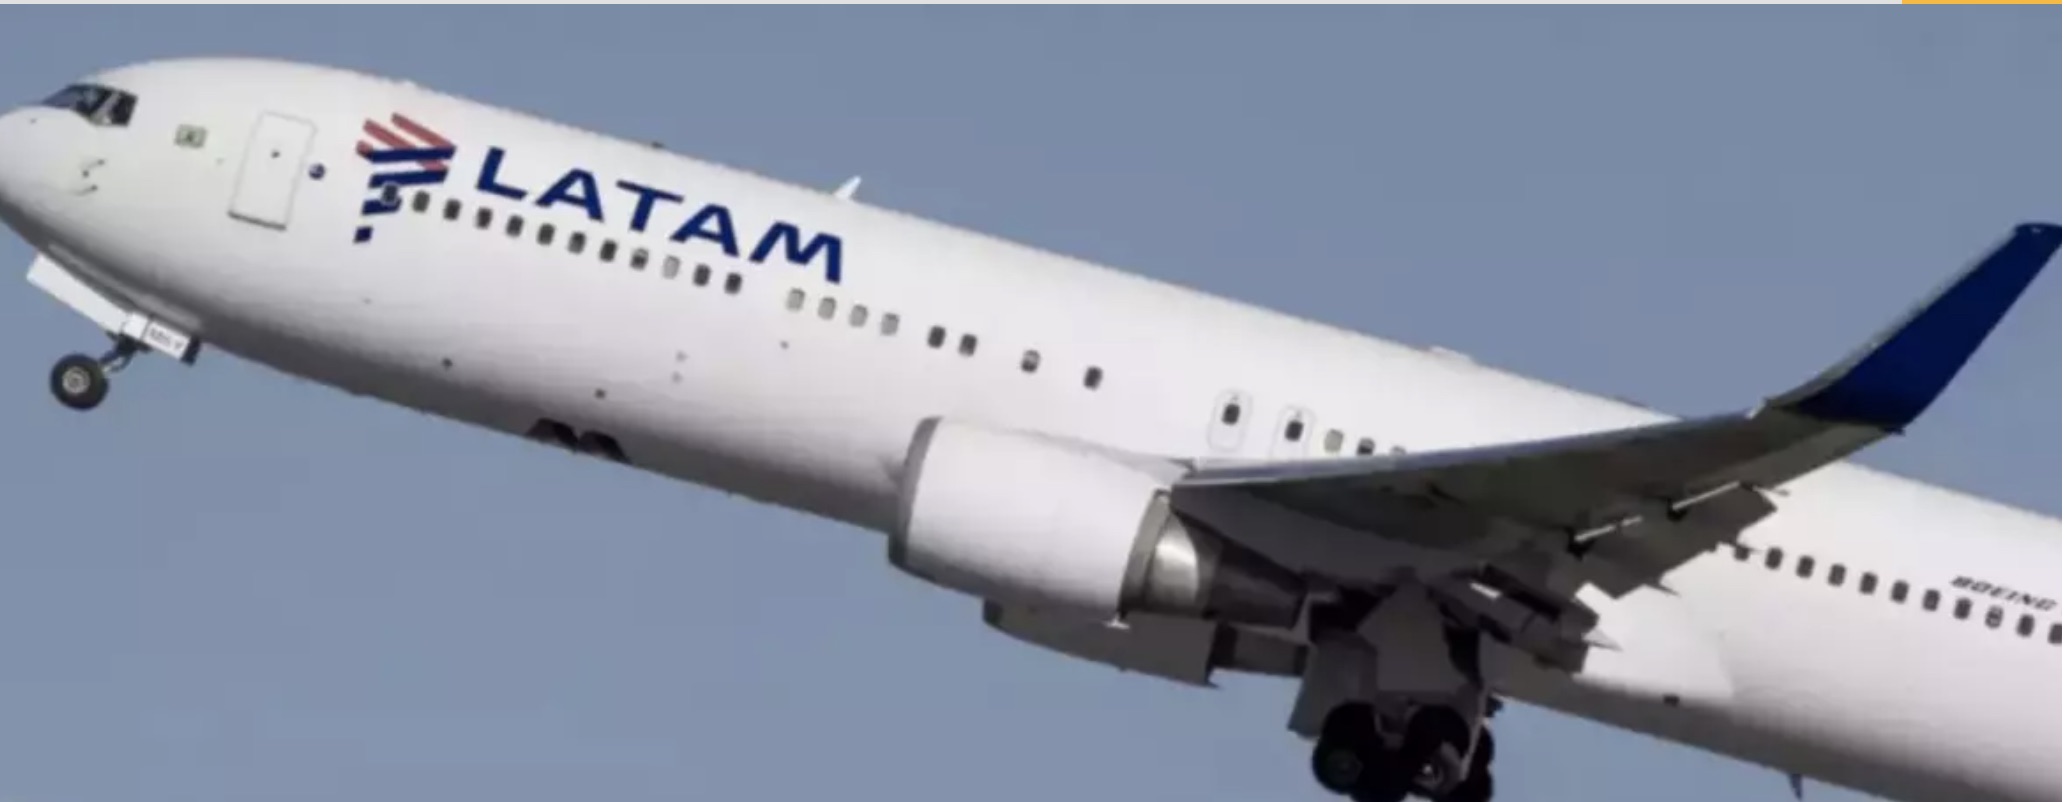 LATAM Brasil will take delivery of new A320neo after 30 months